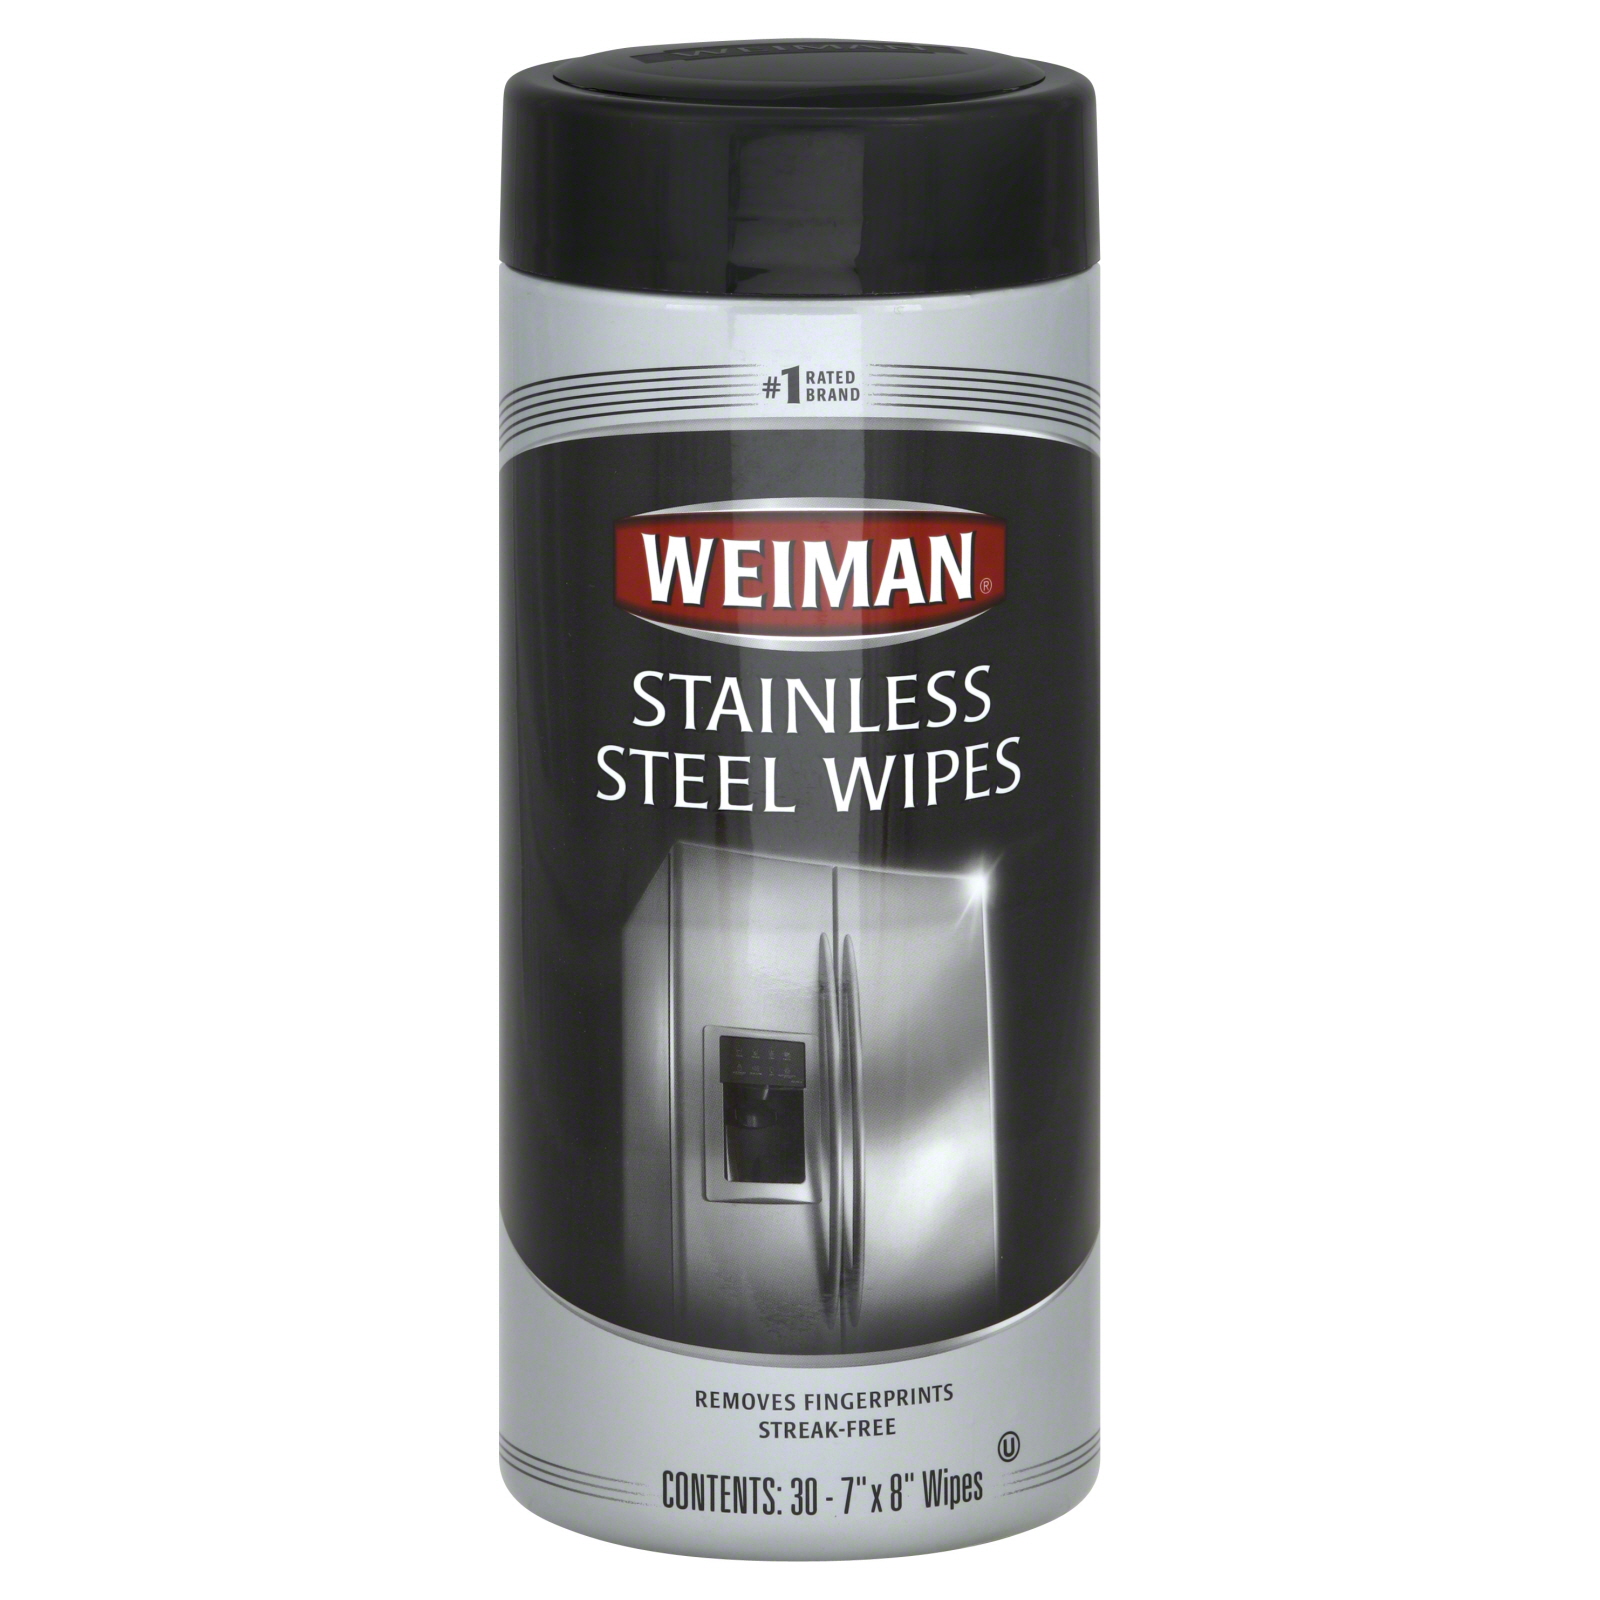 Weiman Stainless Steel Wipes, 30 wipes